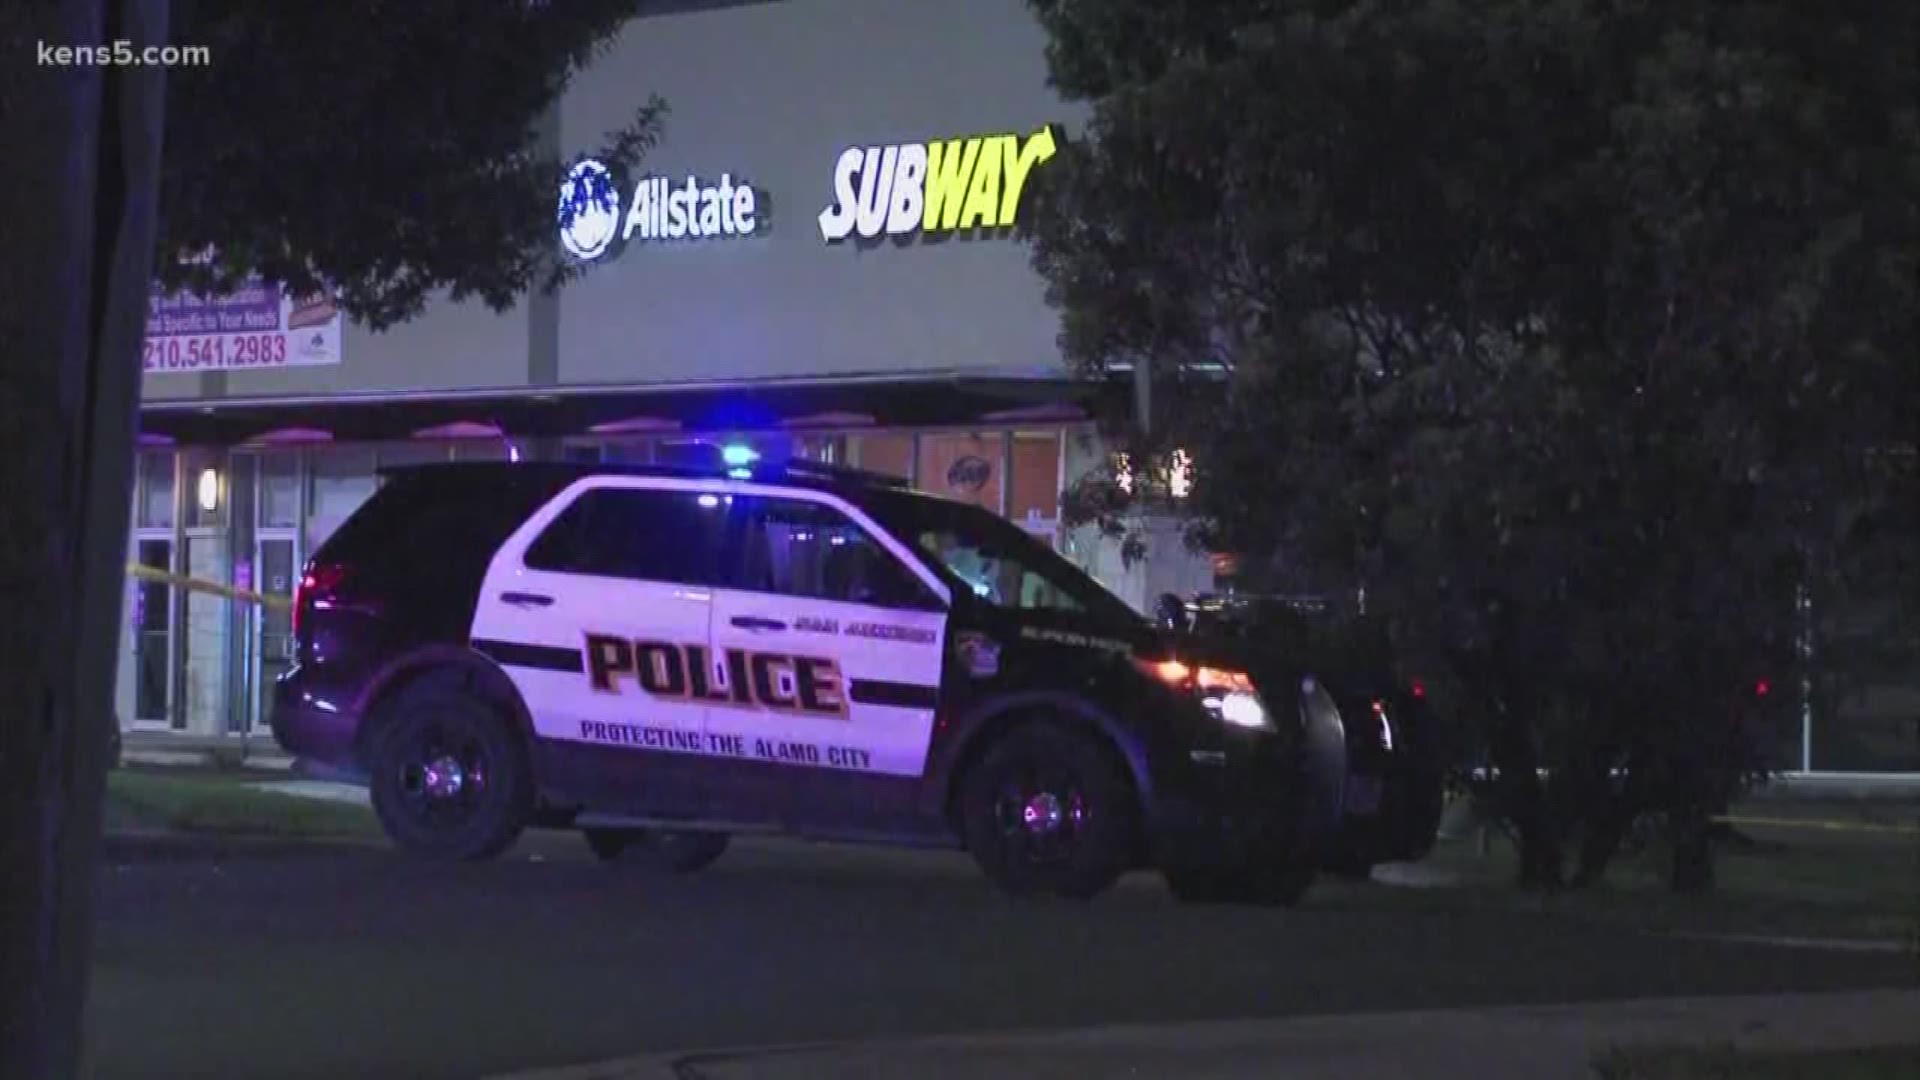 A man held a restaurant employee at gunpoint before aiming his gun at a San Antonio police officer, prompting the officer to fire at him, police said.

The incident took place on Saturday at 11:50 p.m. at the Subway on 9600 Potranco Road.